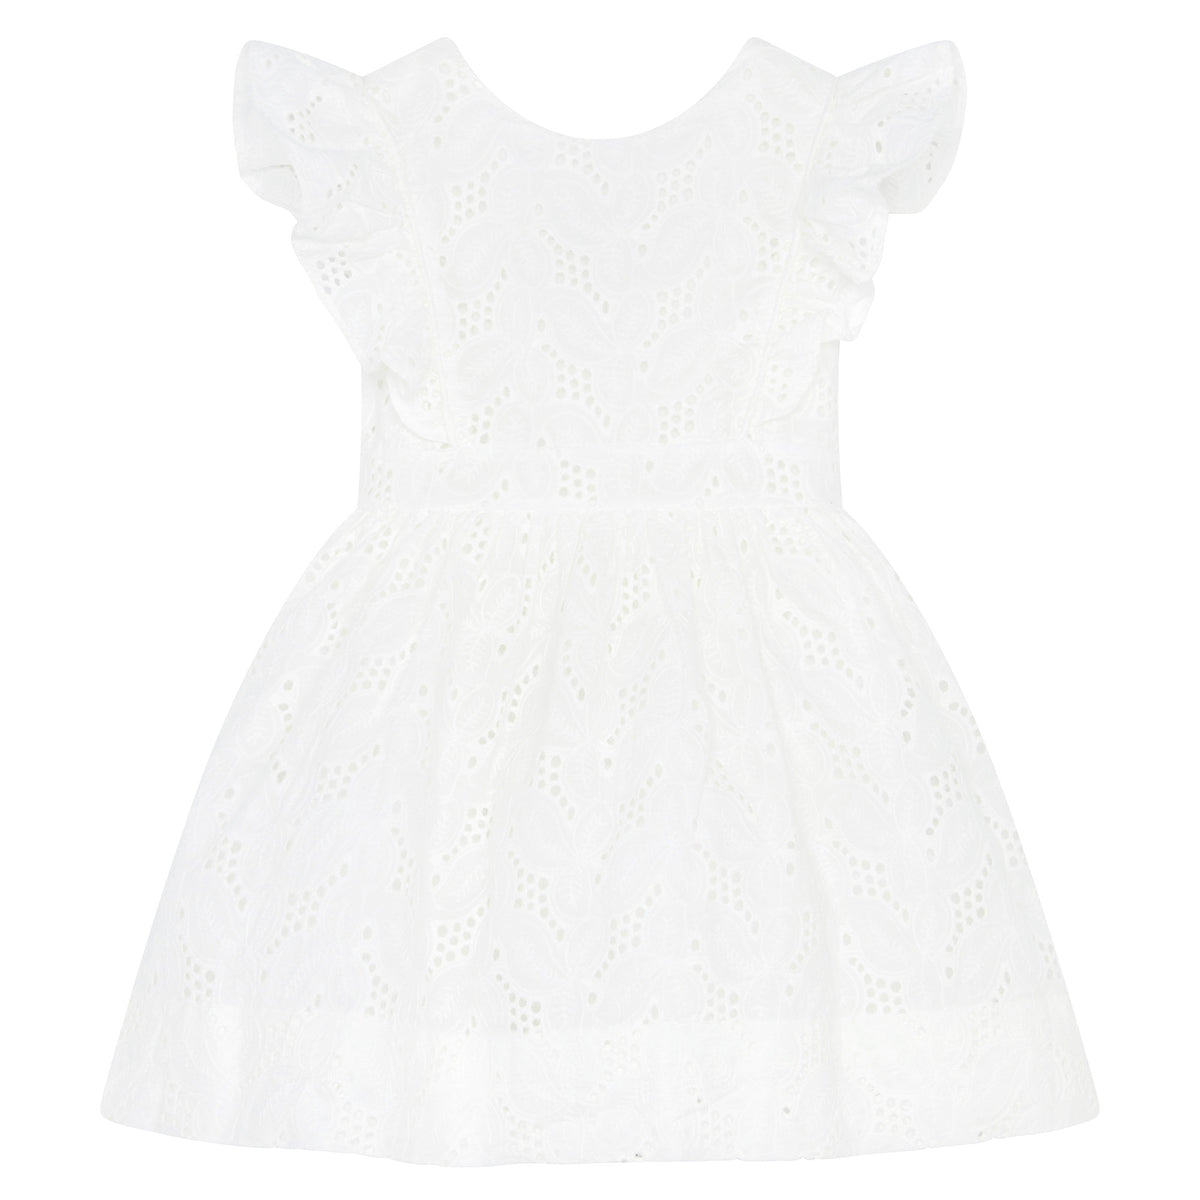 Little Princess Catherine Embroidered Cotton Baby Dress White | Holly Hastie London